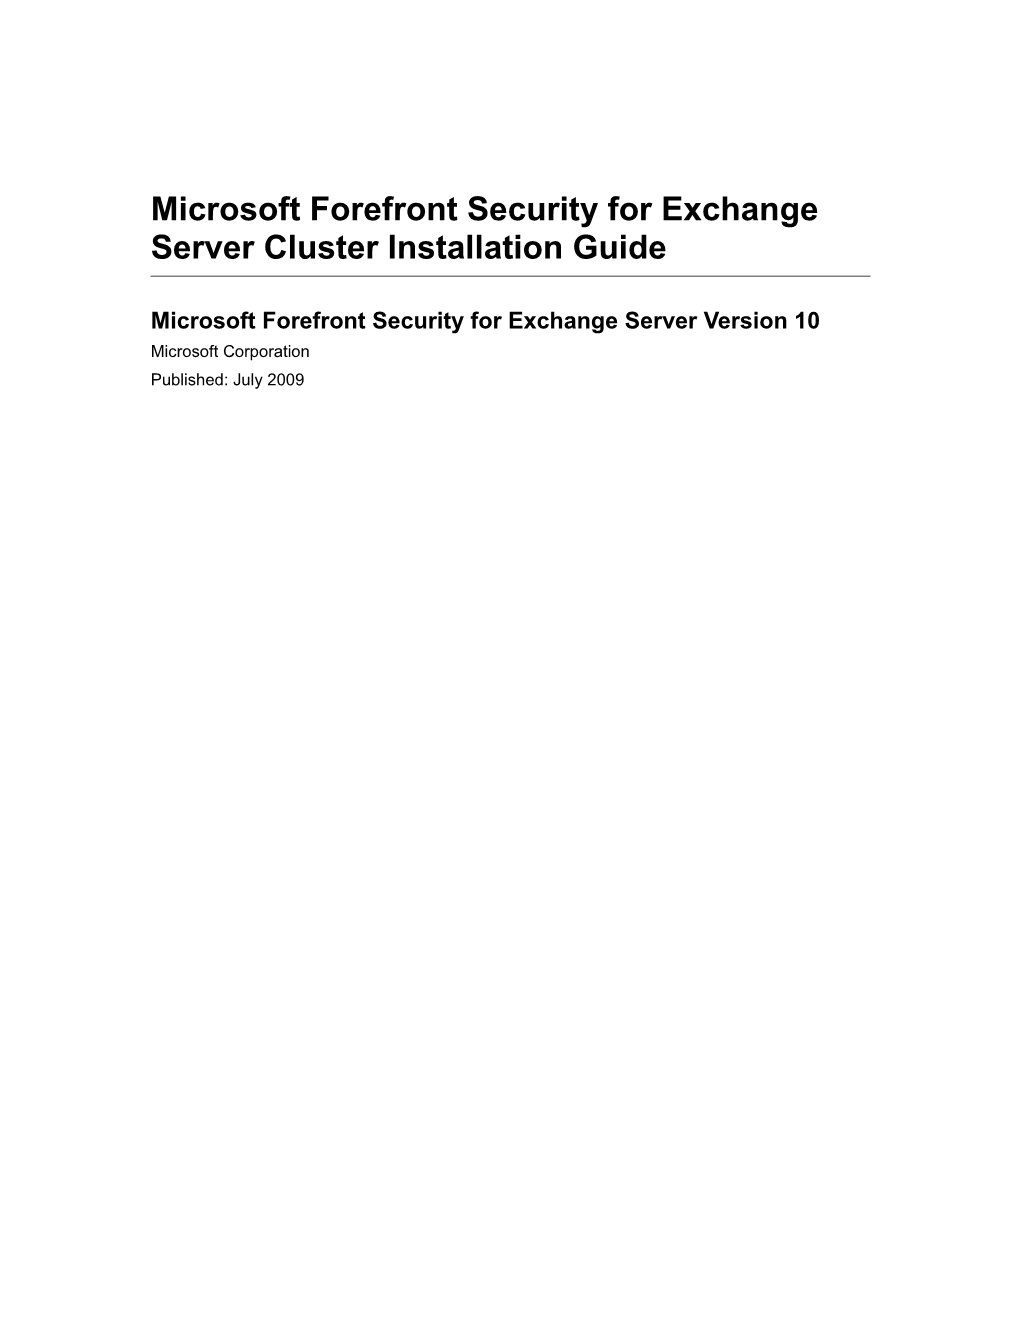 Microsoft Forefront Security for Exchange Server Cluster Installation Guide